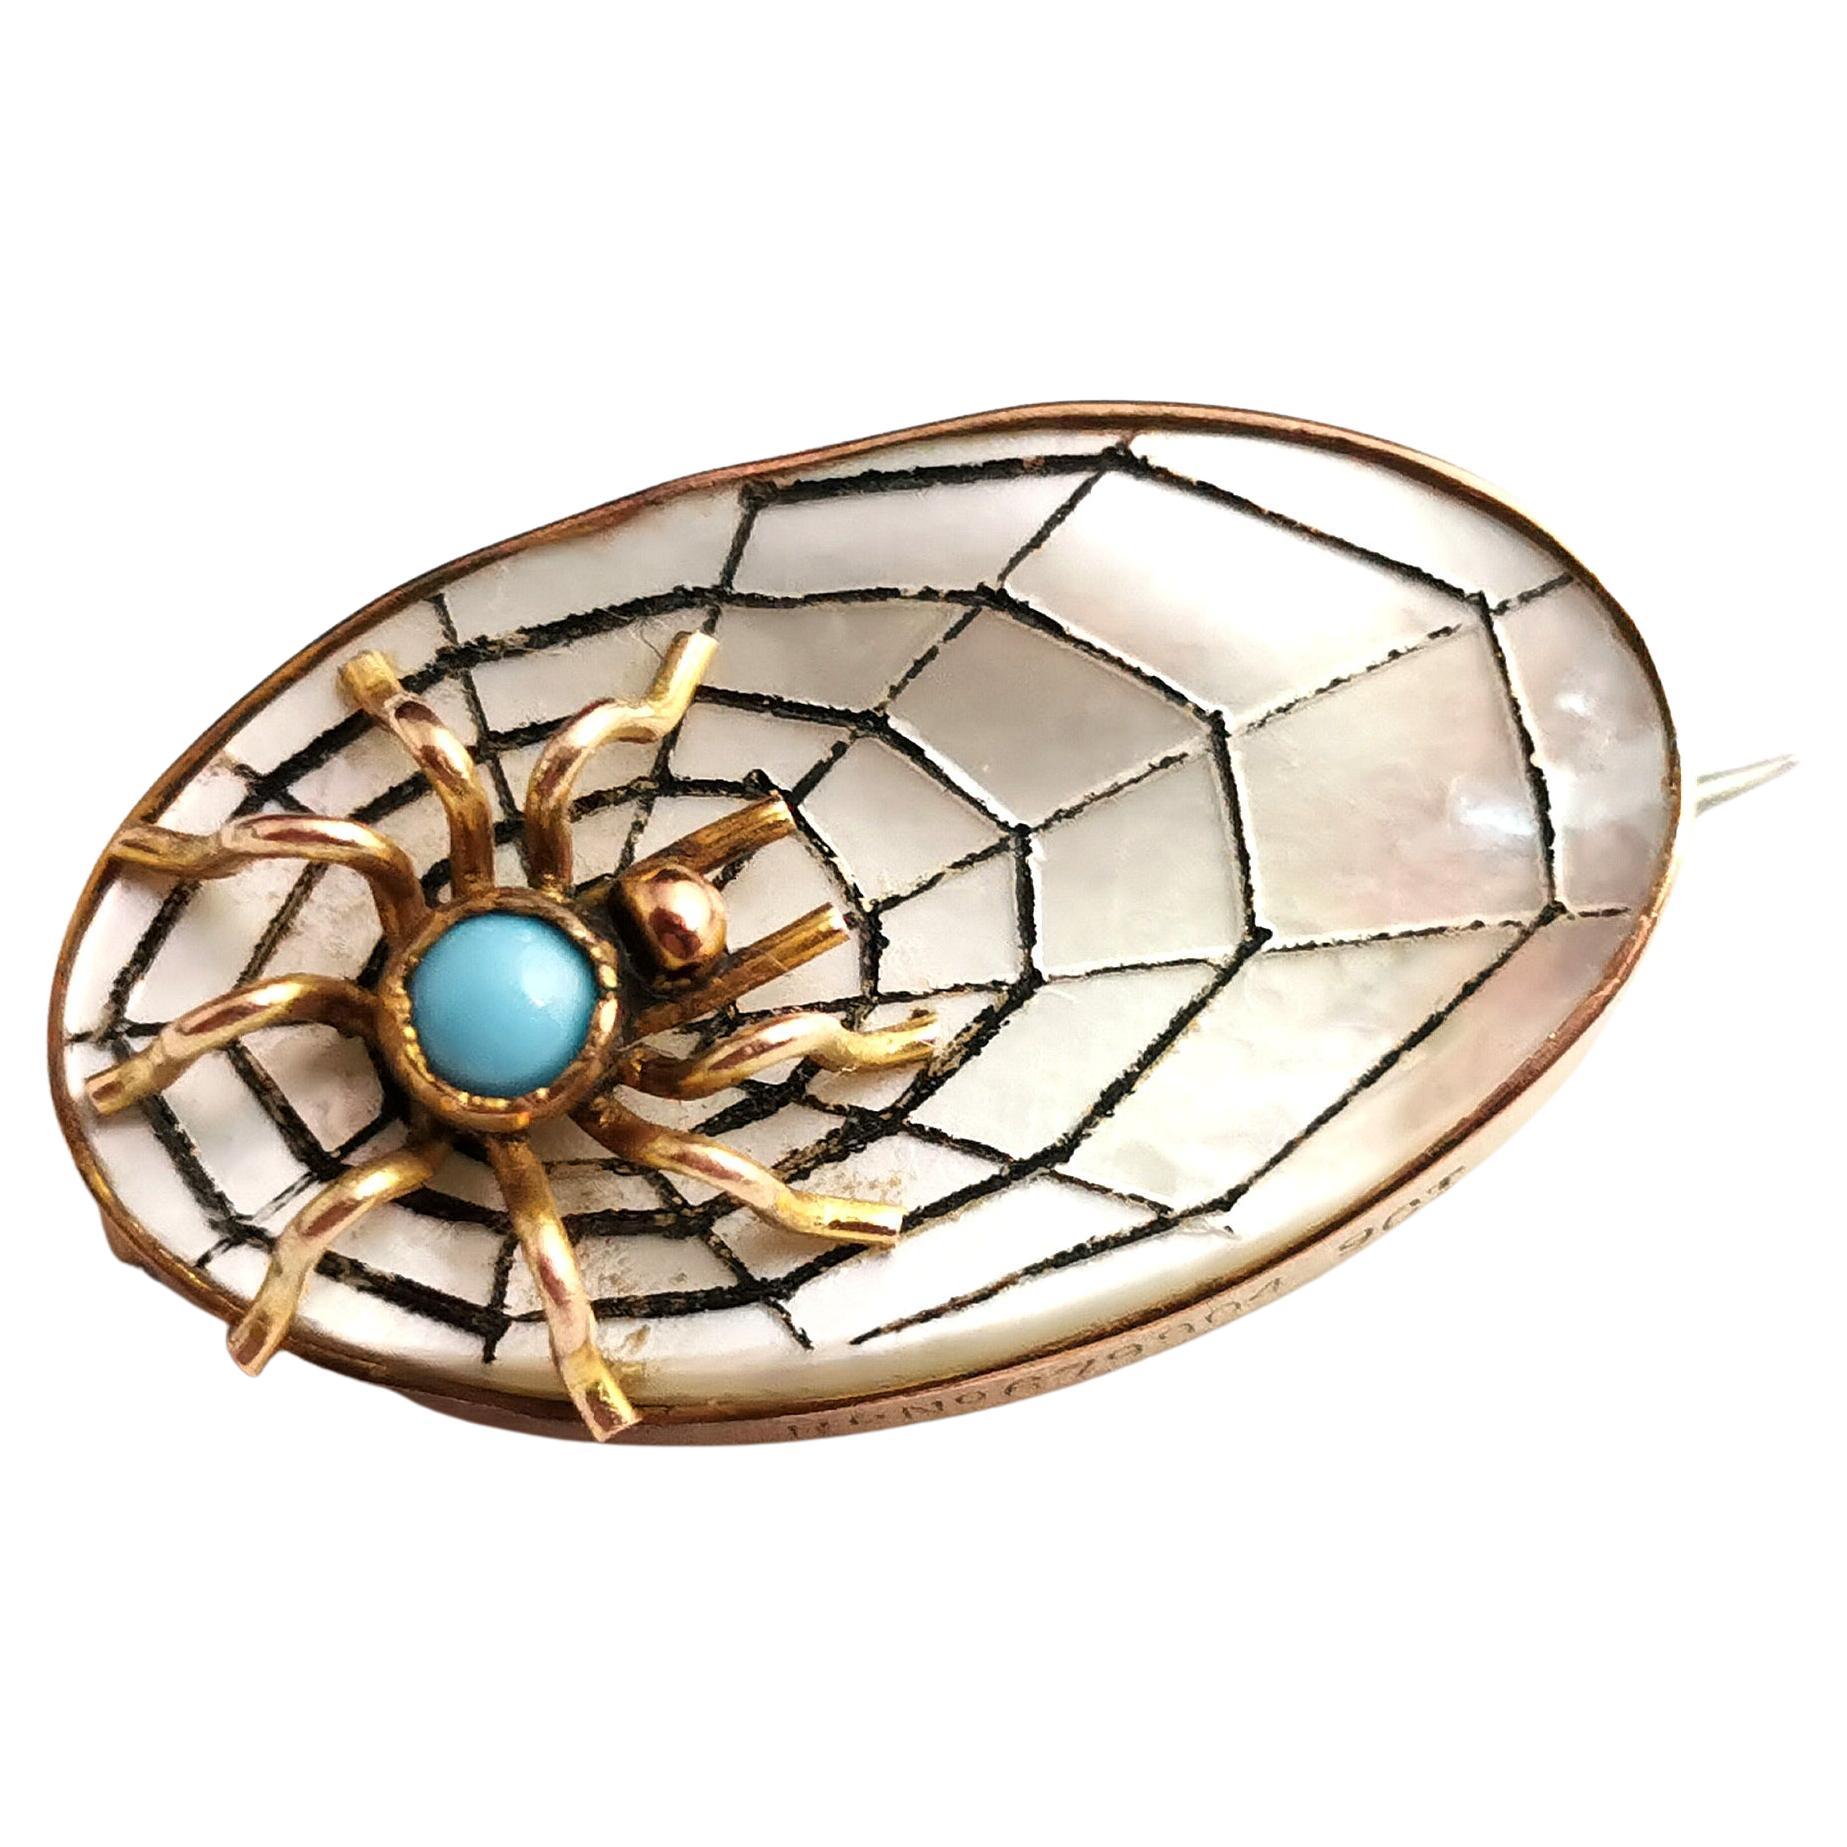 Antique Spider and Web Brooch, 9k Gold, Mother of Pearl